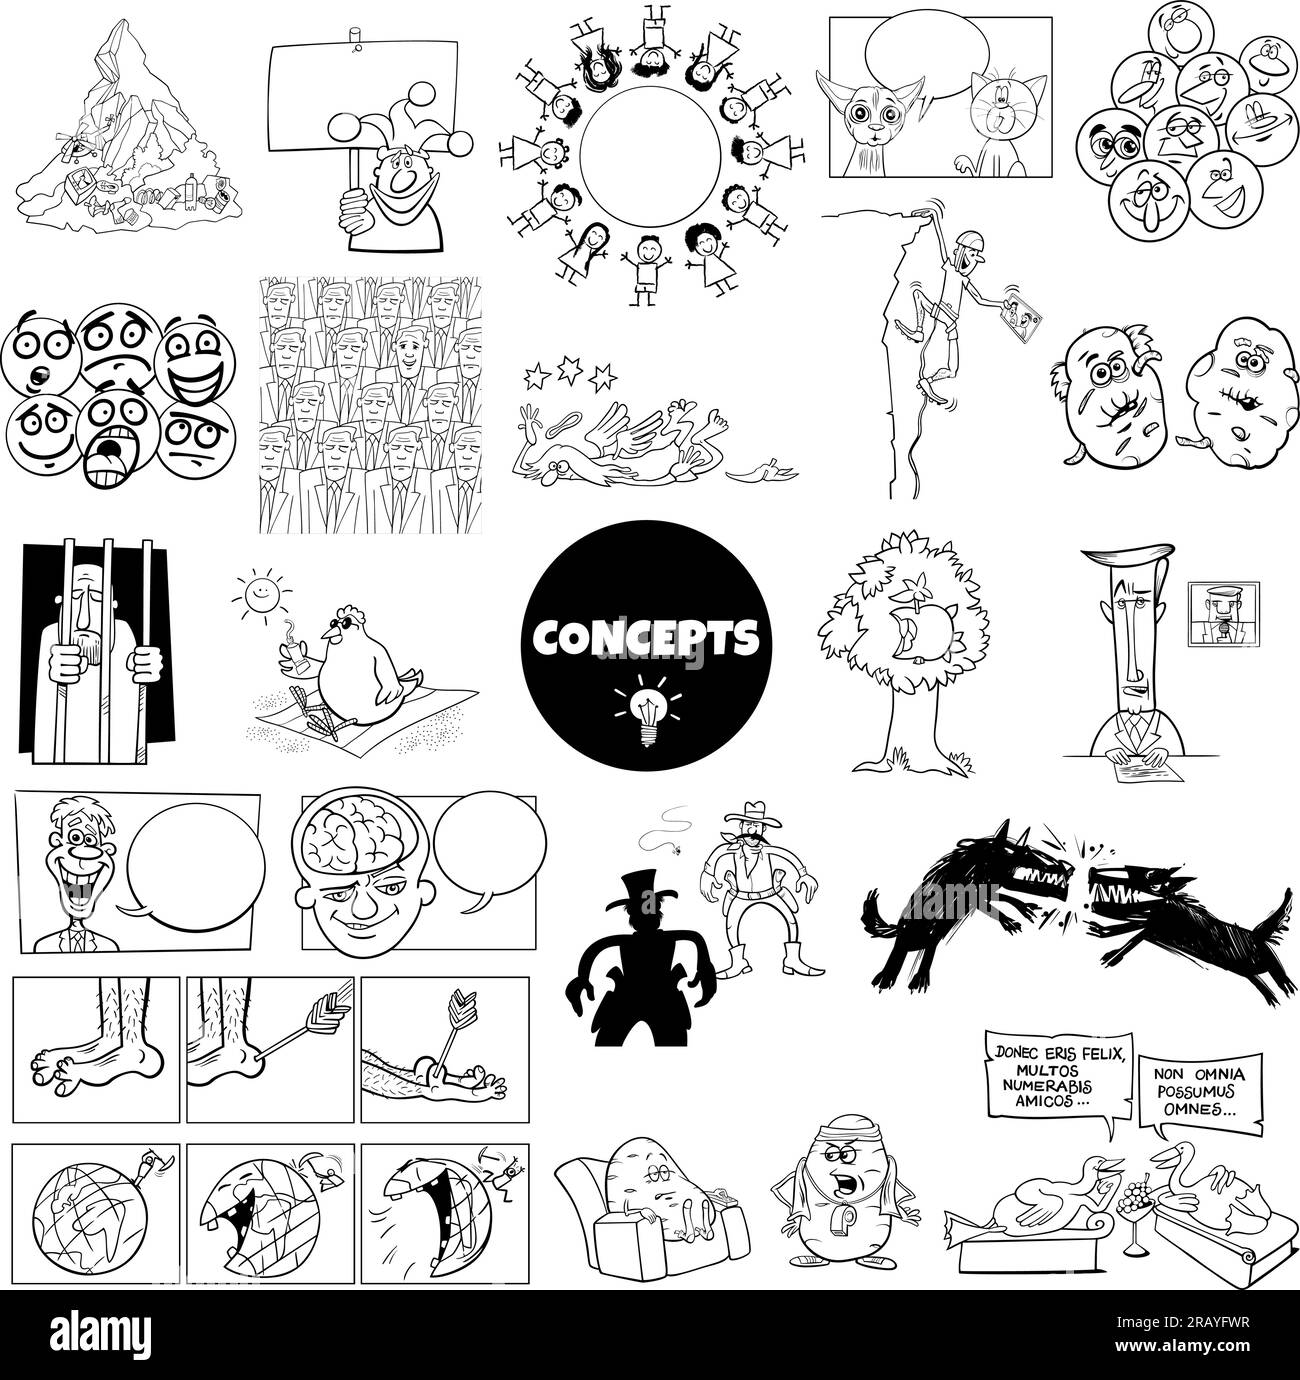 Black and white ilustration set of humorous cartoon concepts or metaphors and ideas with comic characters Stock Vector